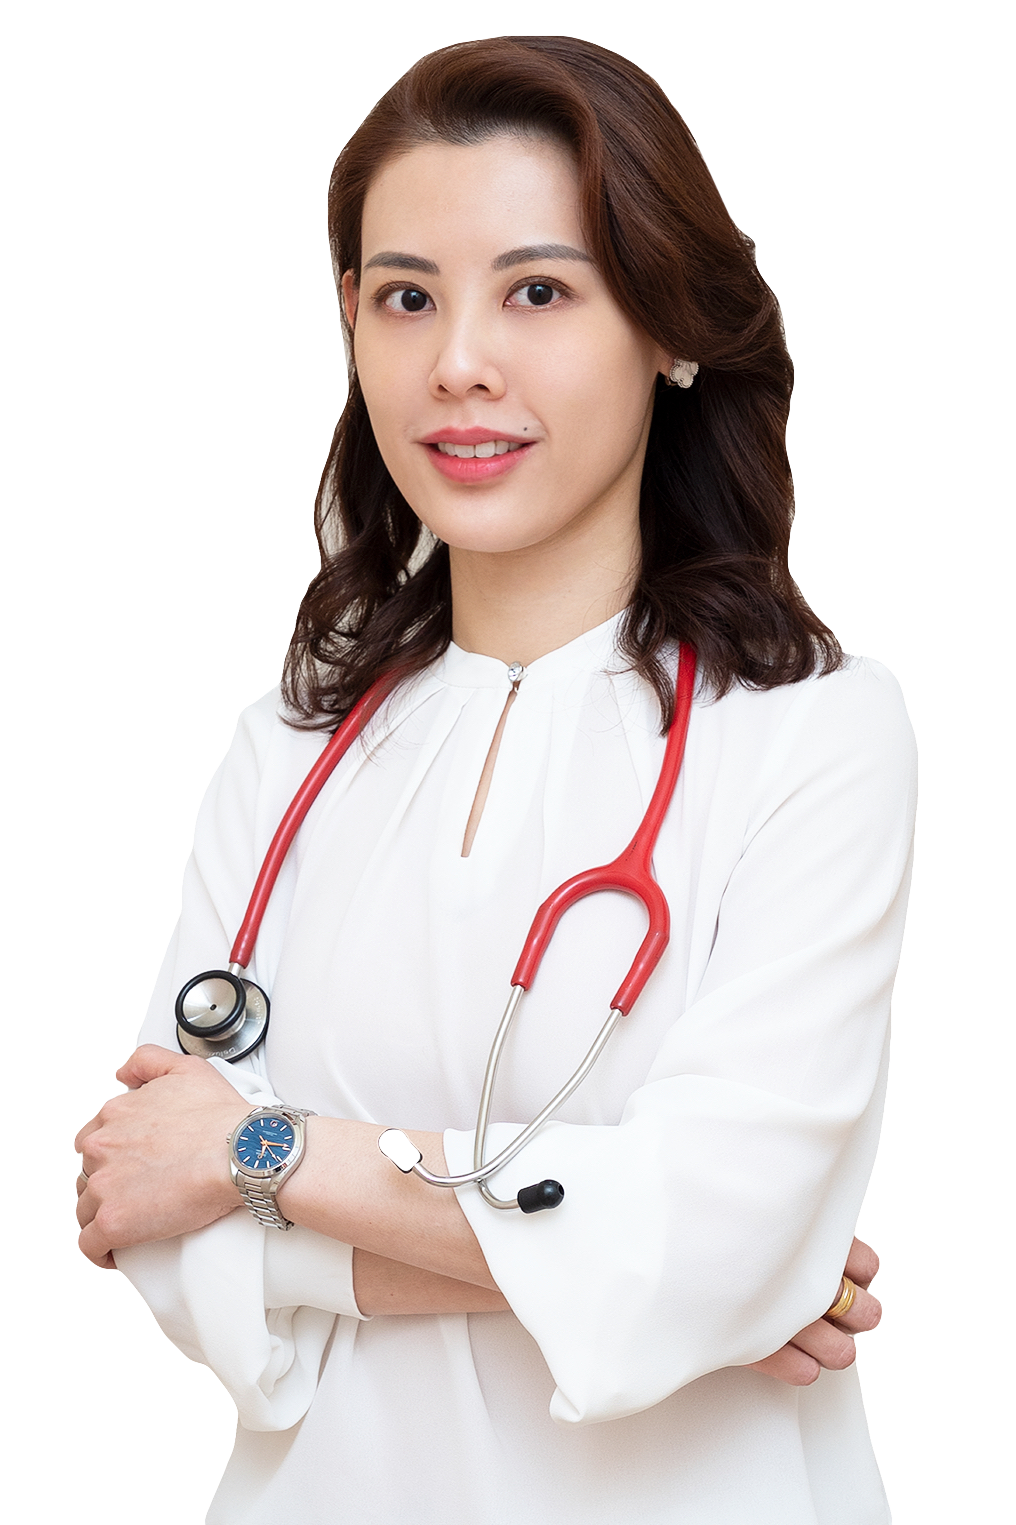 Dr Kimberly Yap Hae Mun: Founder and Medical Director